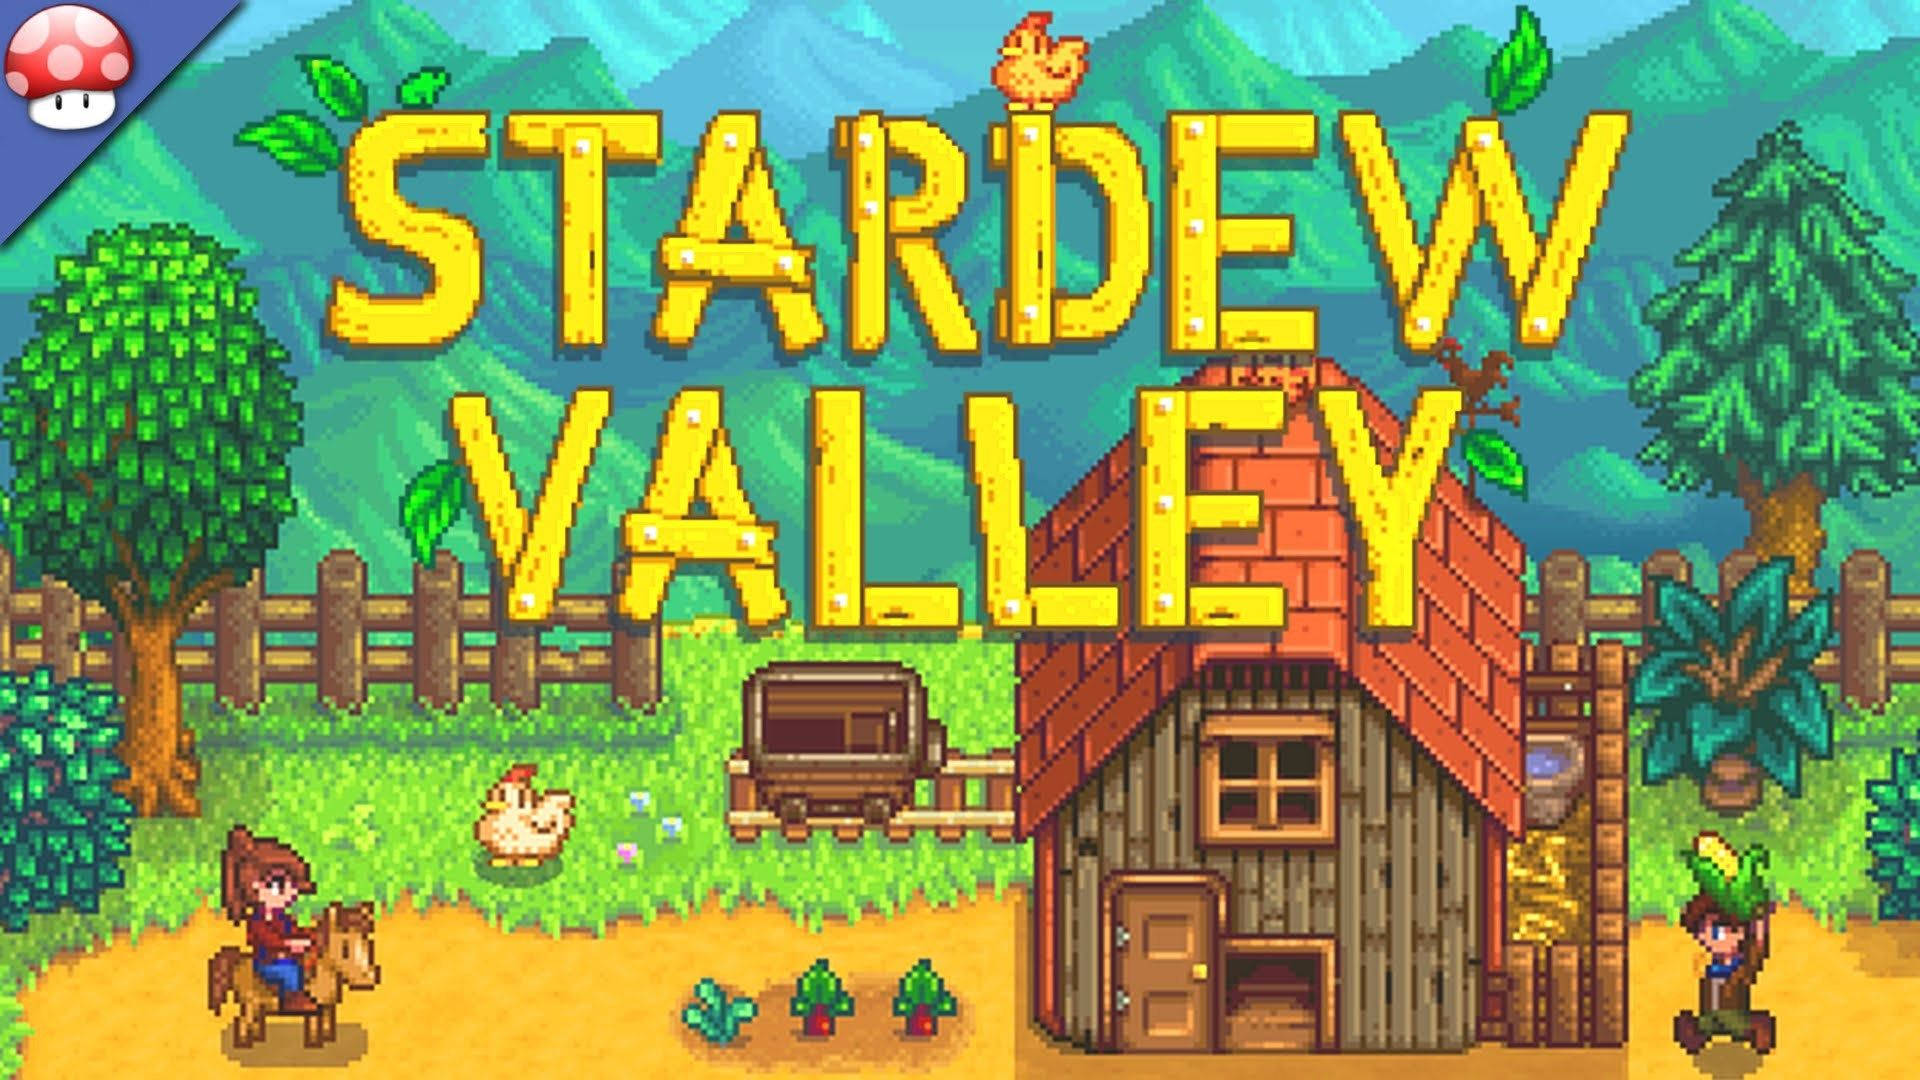 Free Stardew Valley Wallpaper Downloads, [100+] Stardew Valley Wallpapers  for FREE 